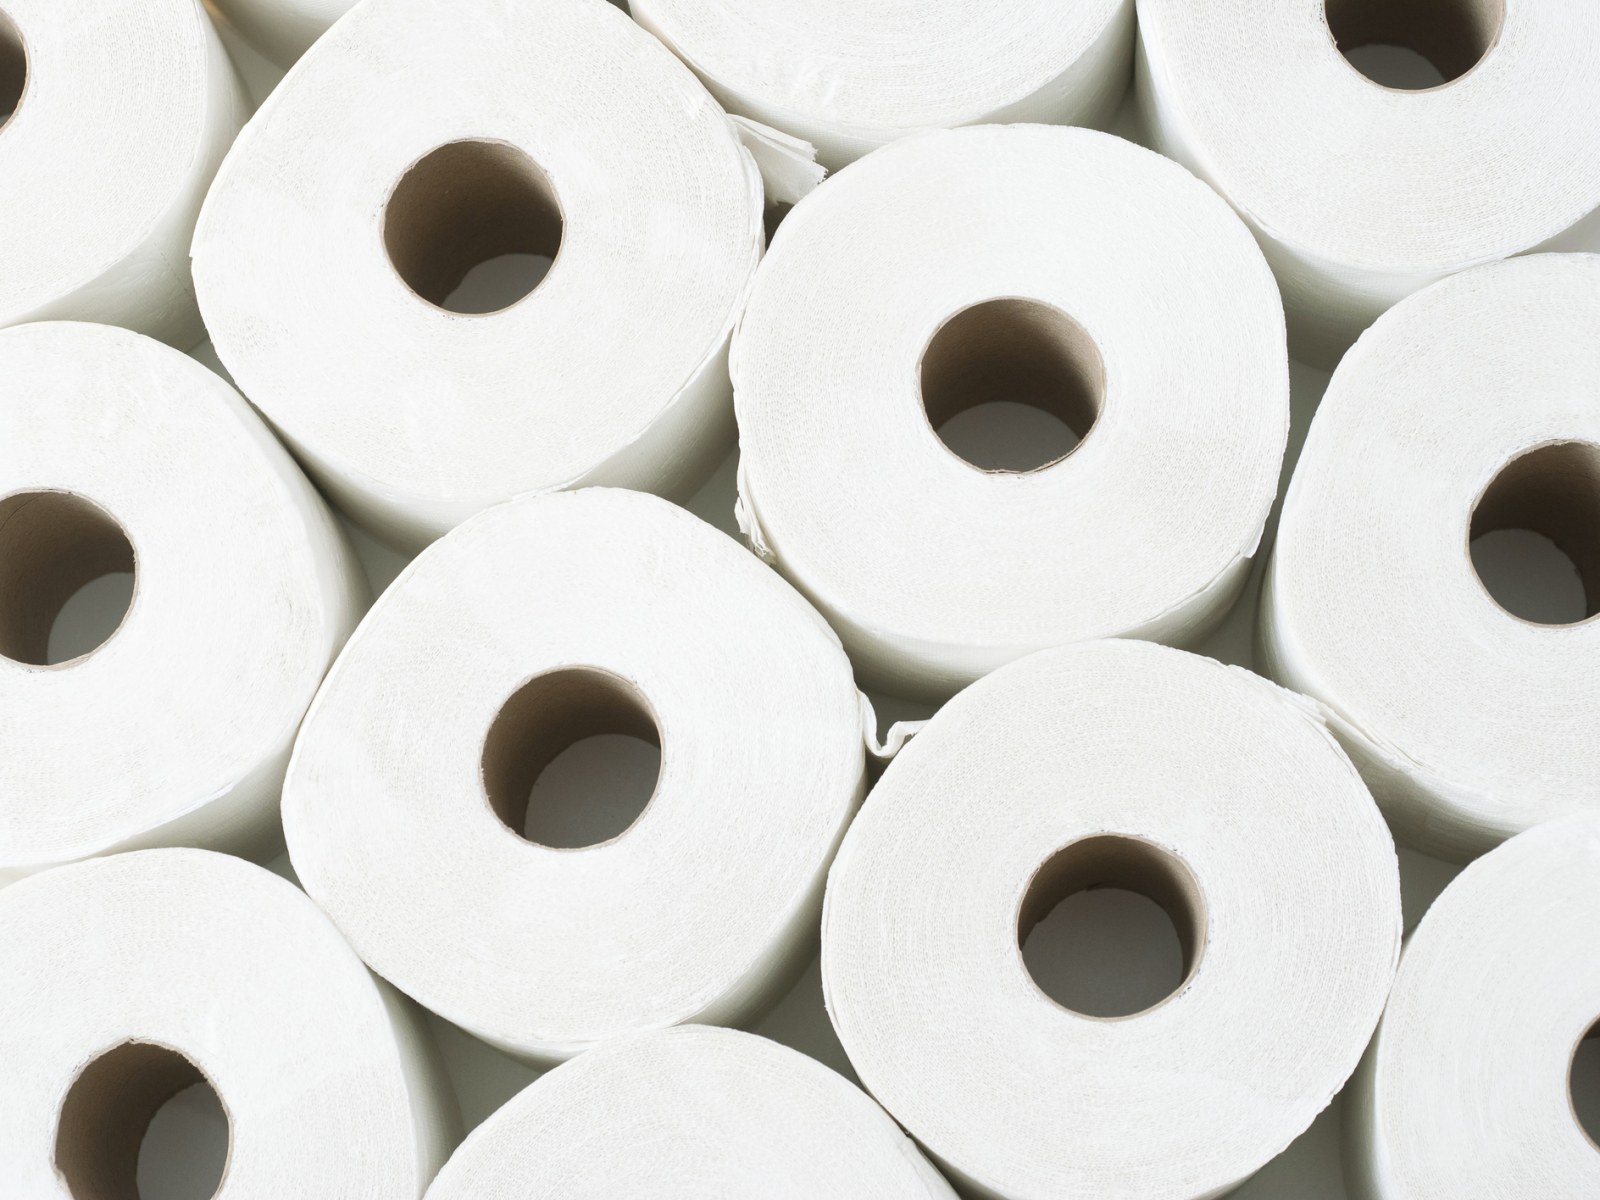 Toilet paper a source of PFAS in wastewater, study finds